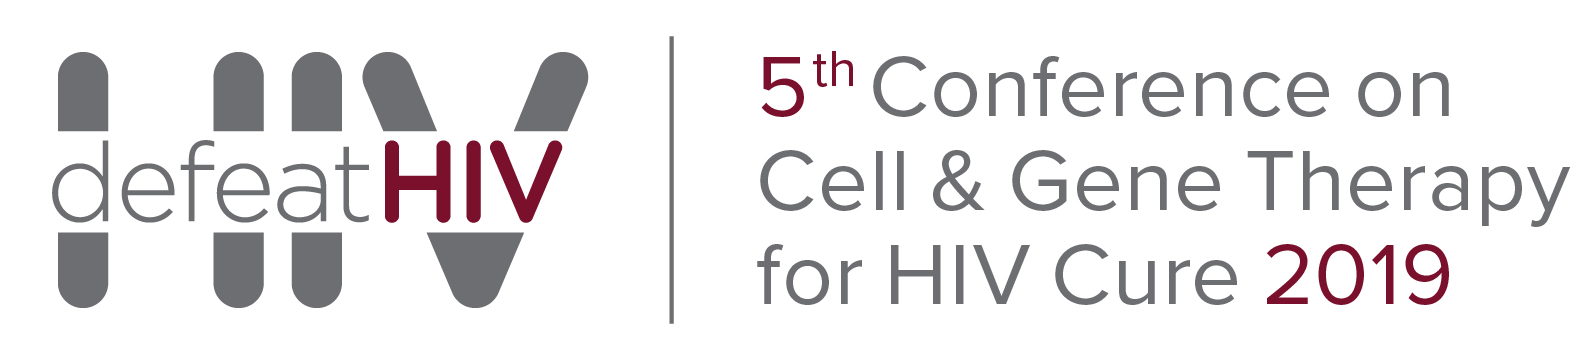 CGT4HIVCure 2019 Applications logo